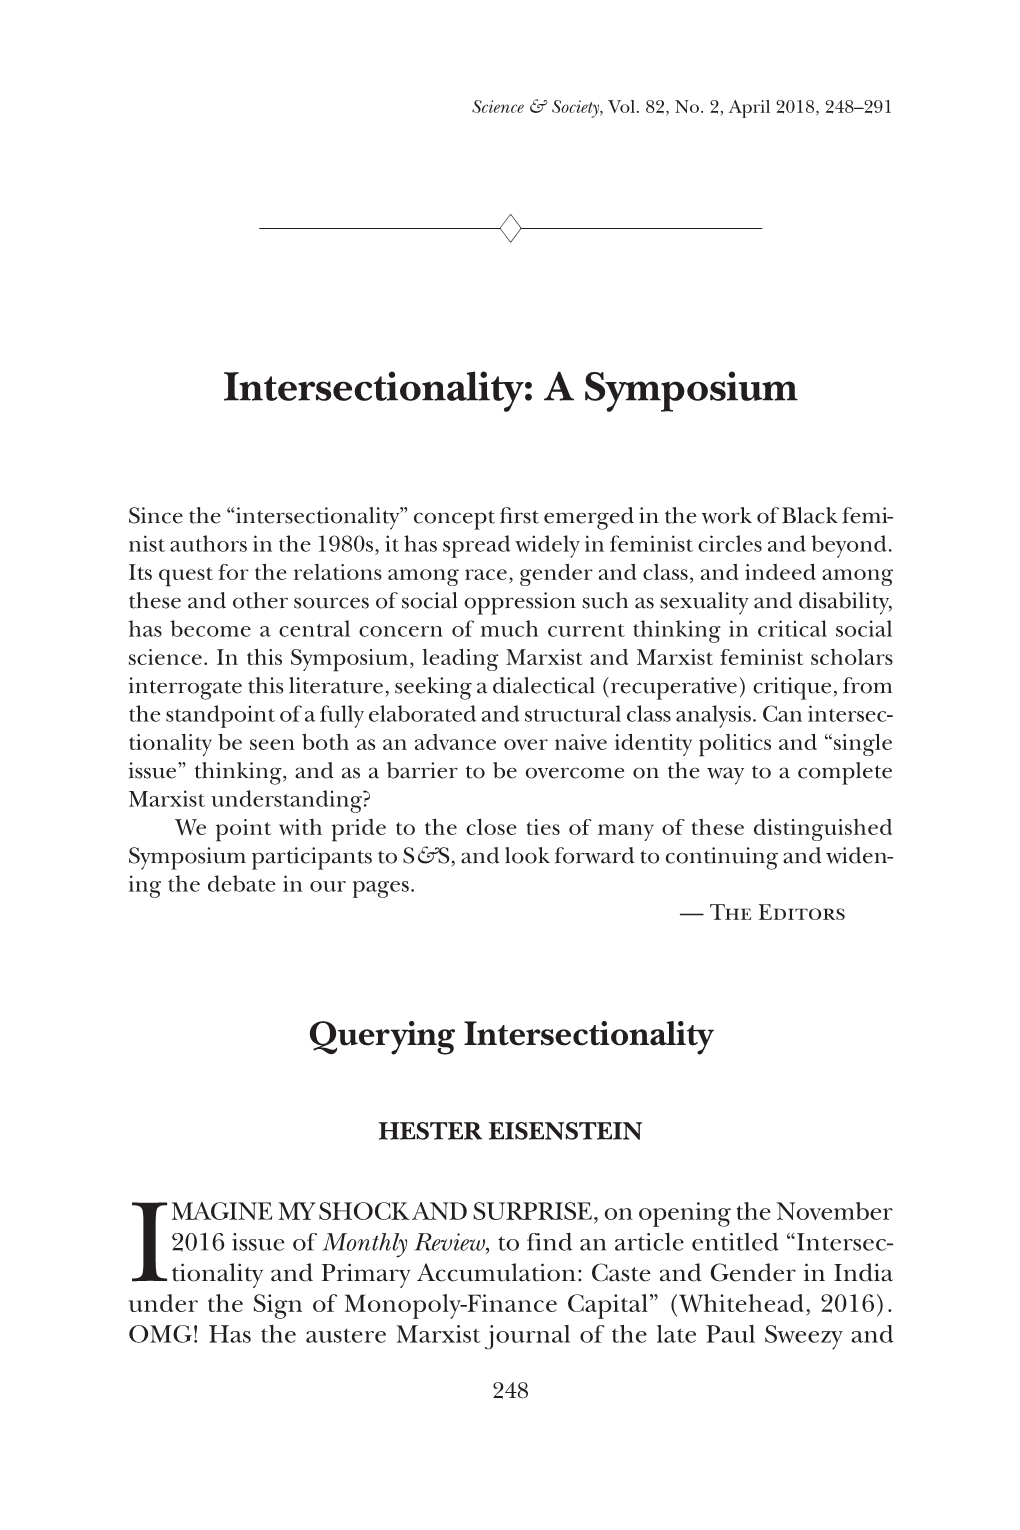 Intersectionality: a Symposium